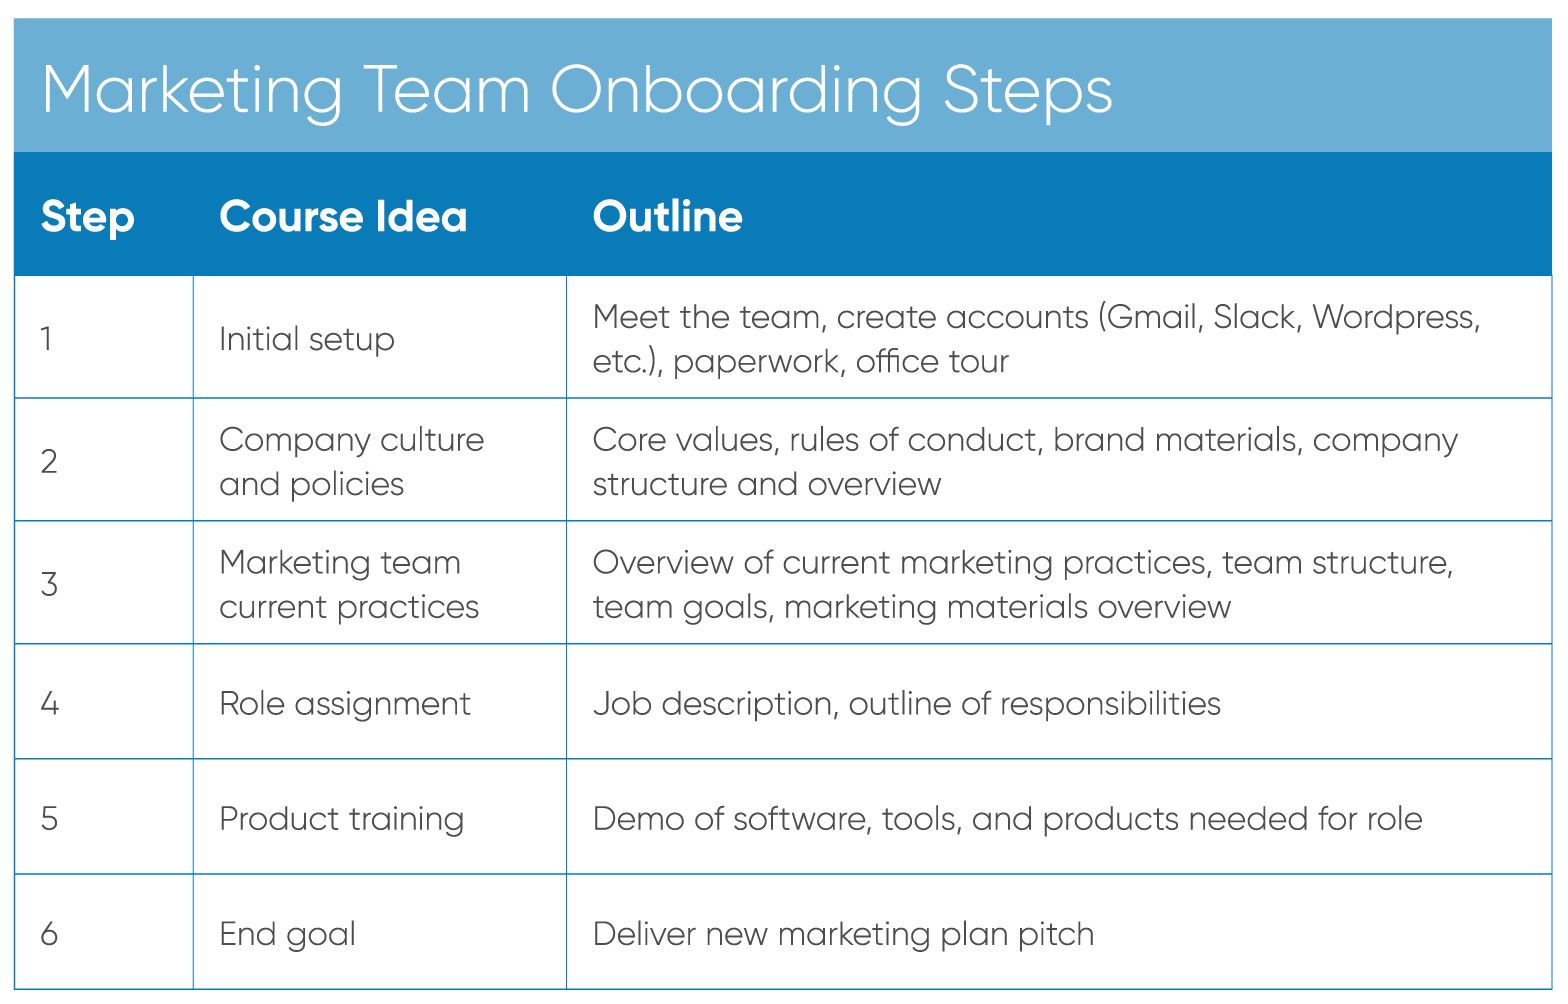 onboarding plan - list each step of the onboarding training